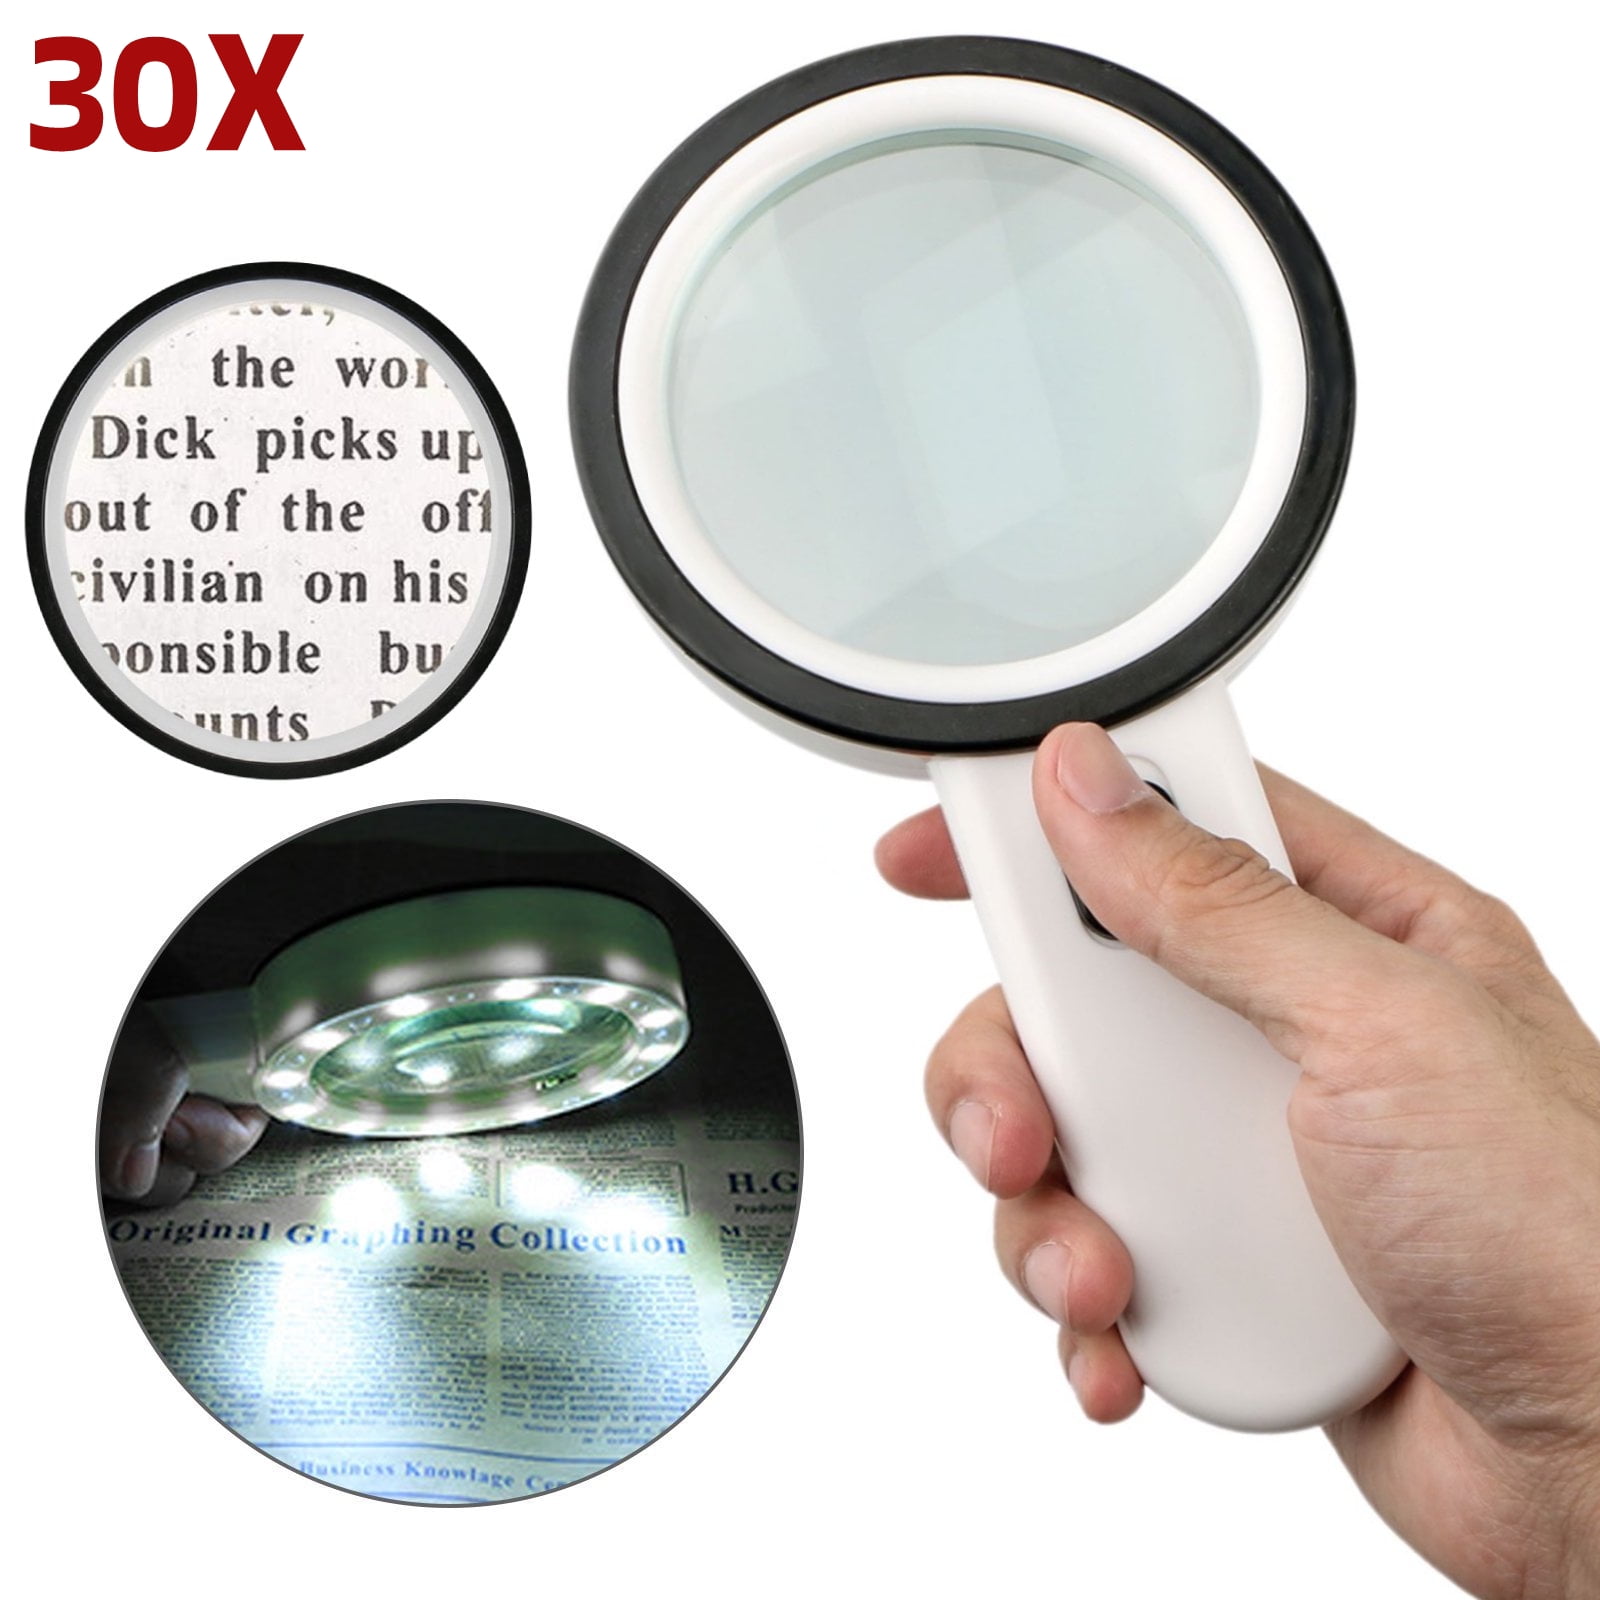 Handheld Rectangular Magnifier Magnifying Glass Loupe For Reading Jewelry UK 